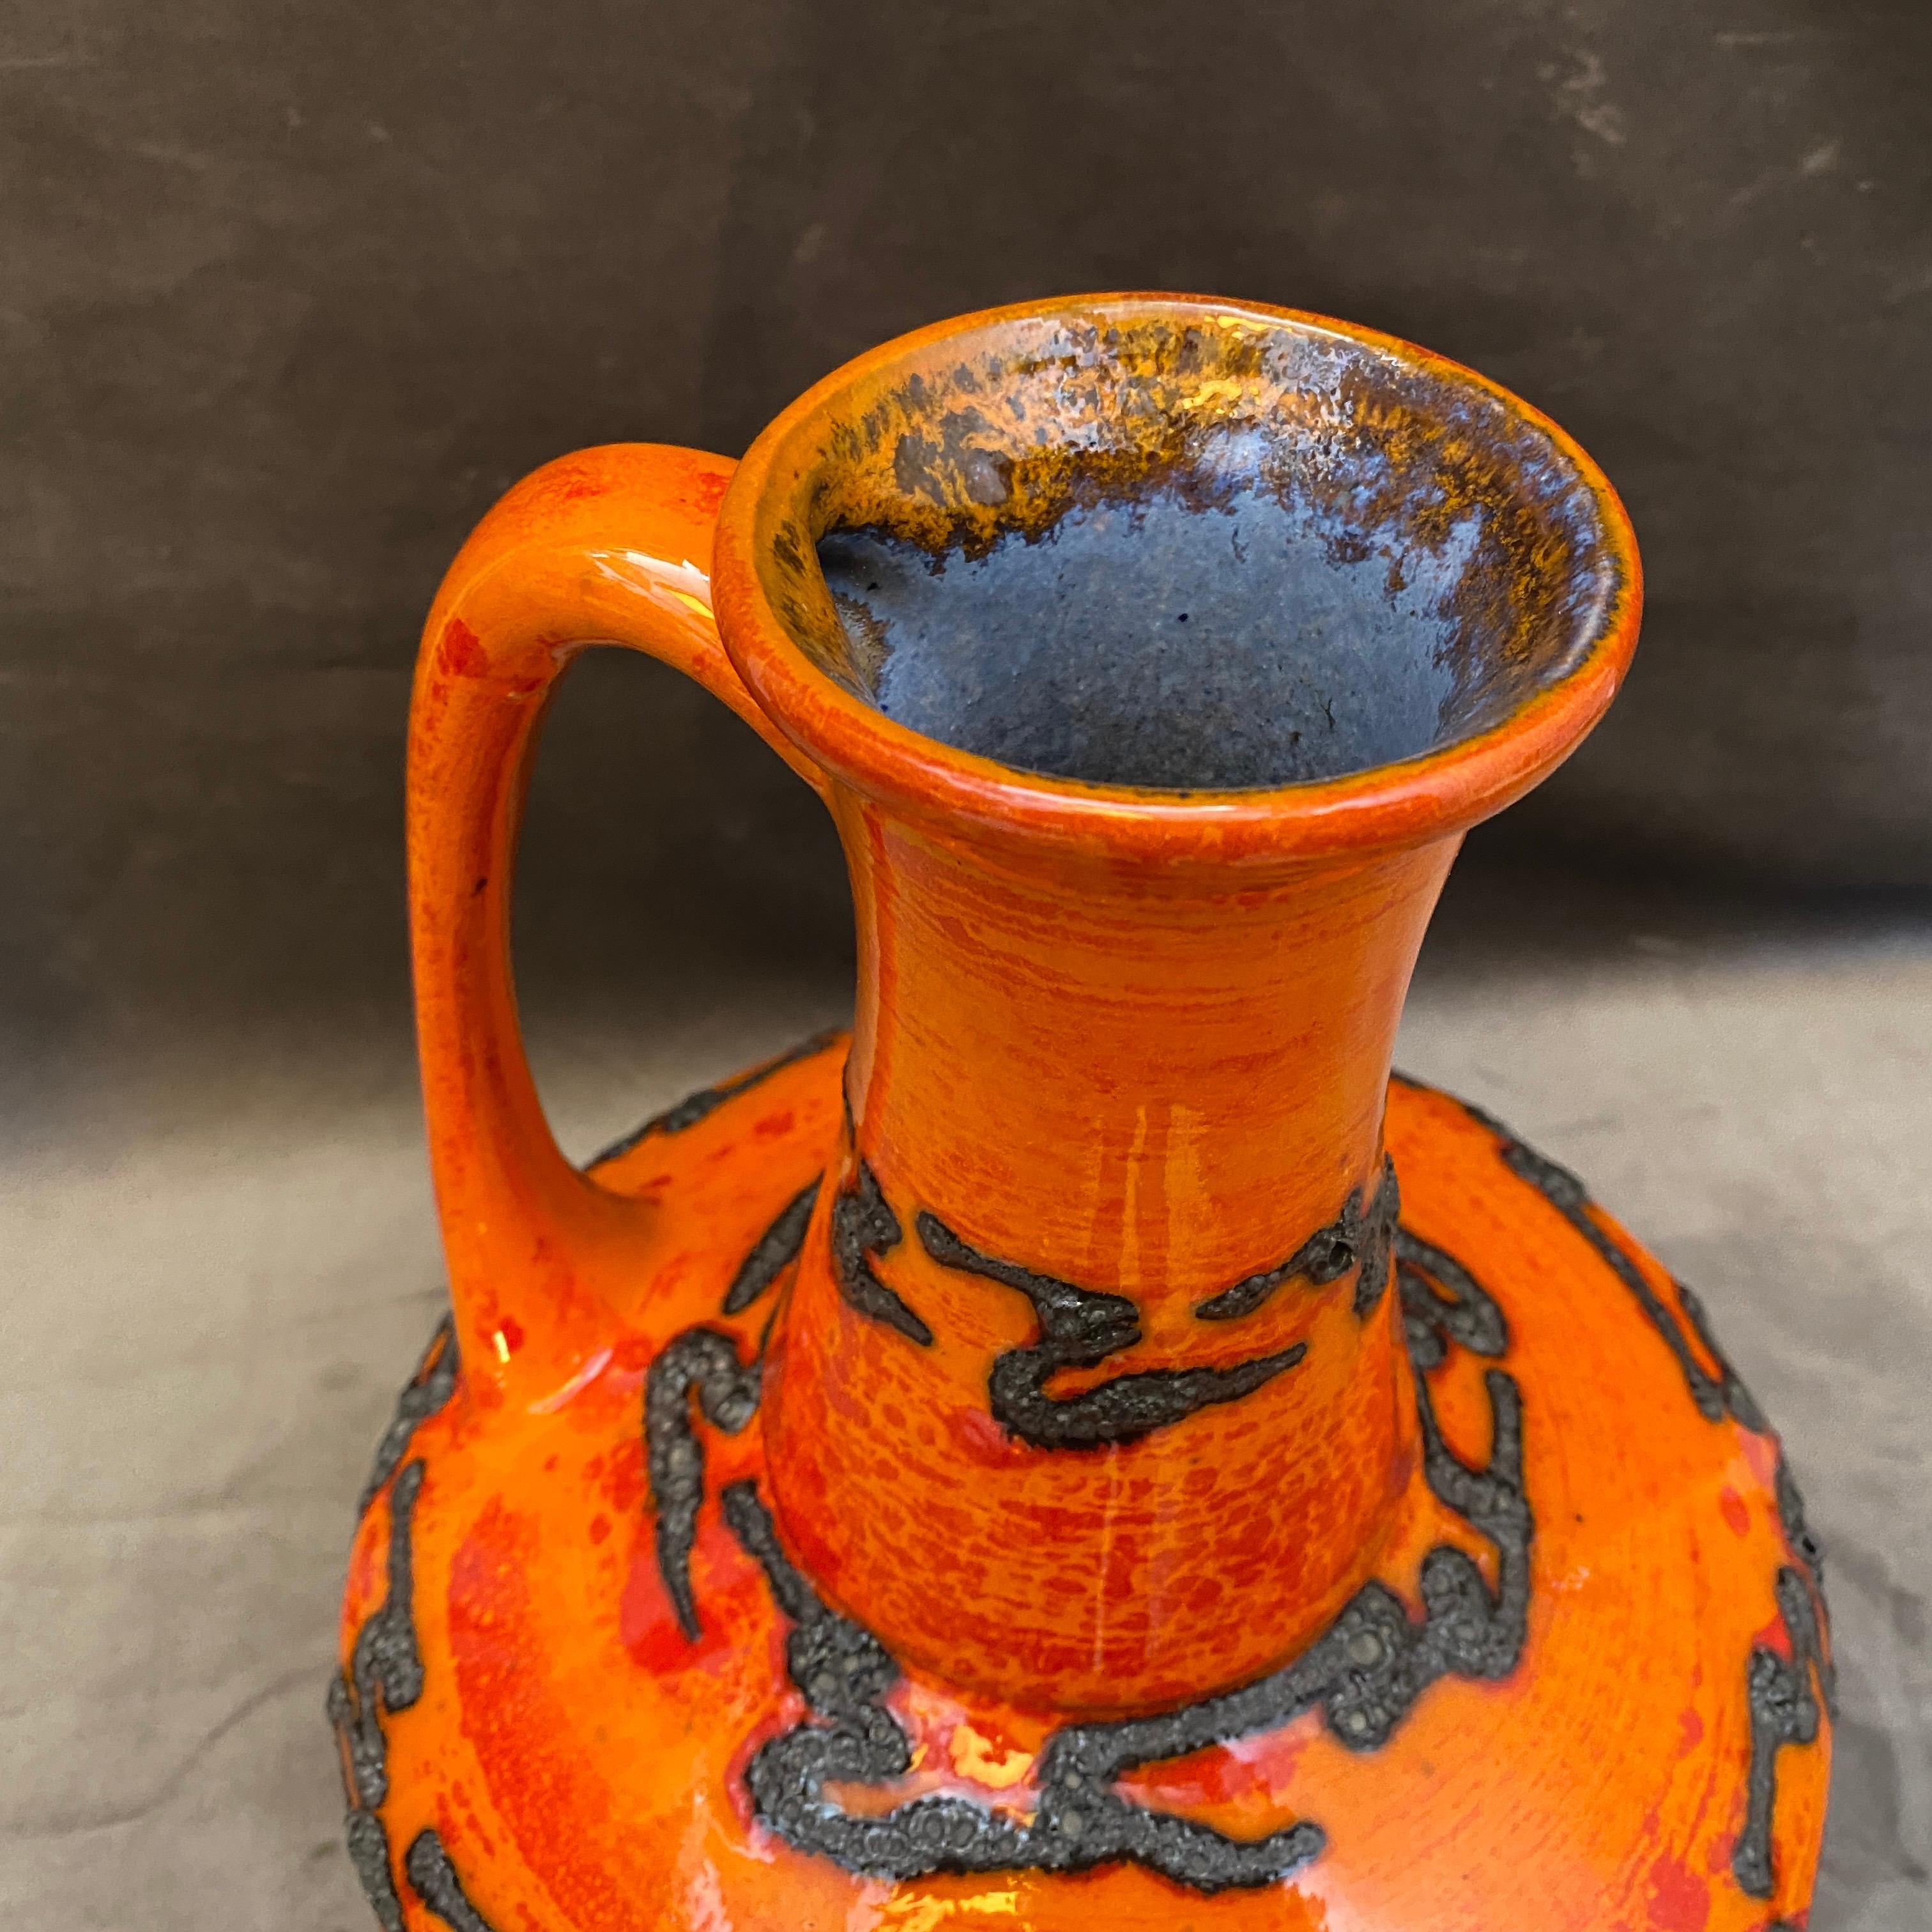 A rare fat lava keramik vase made in West Germany, the orange color is an icon of the 1970s.